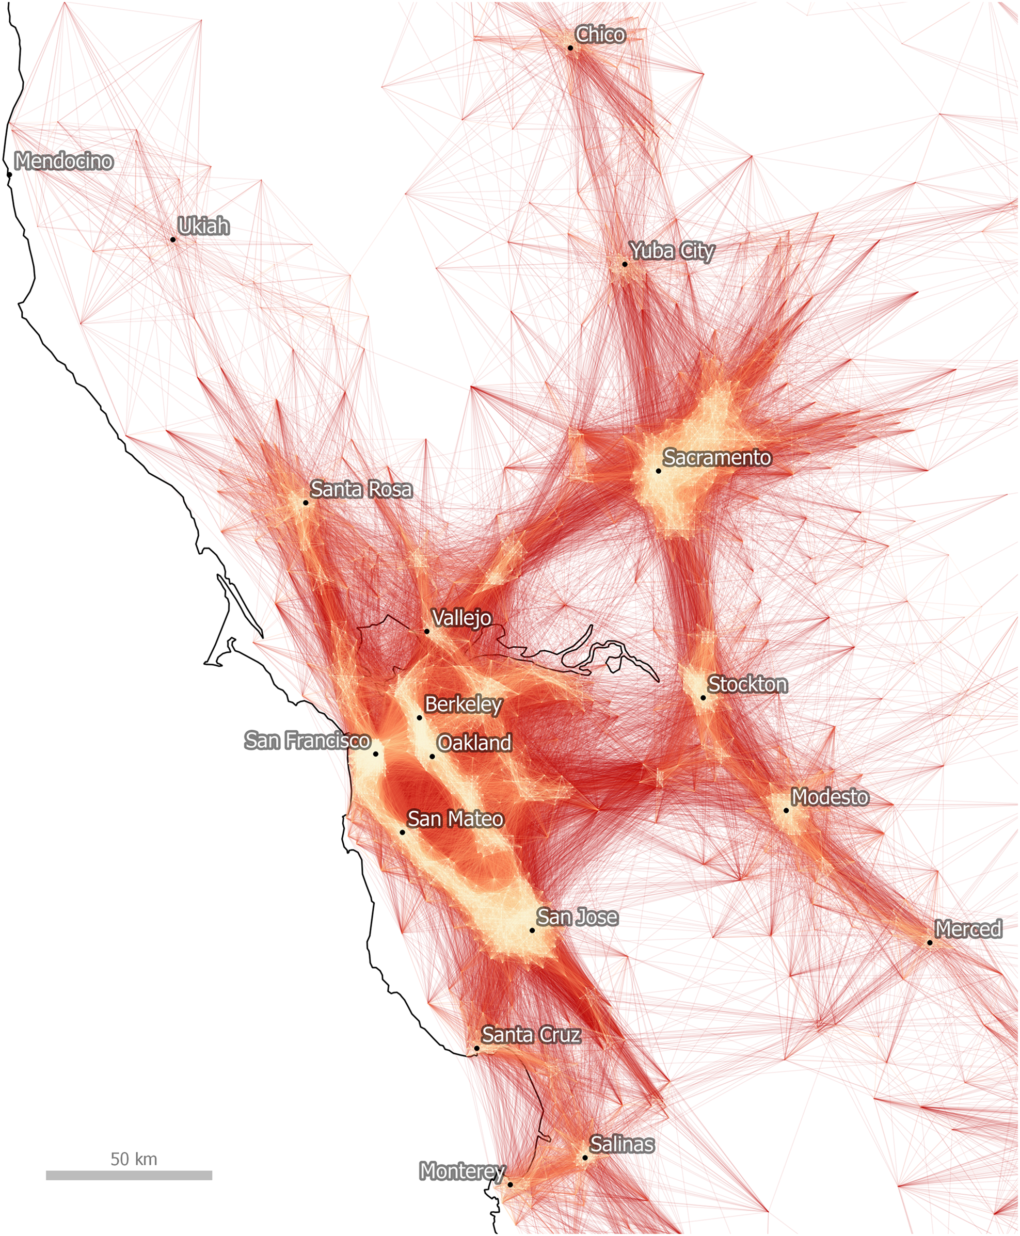 A heat map of commutes in Northern California reveals the urbanized core of the Bay Area, Sacramento and Central Valley cities, as well as the workers who flow into and out of each. Source: Dash Nelson G, Rae A (2016) An Economic Geography of the United States: From Commutes to Megaregions. PLoS ONE 11(11): e0166083. https://doi.org/10.1371/journal.pone.0166083